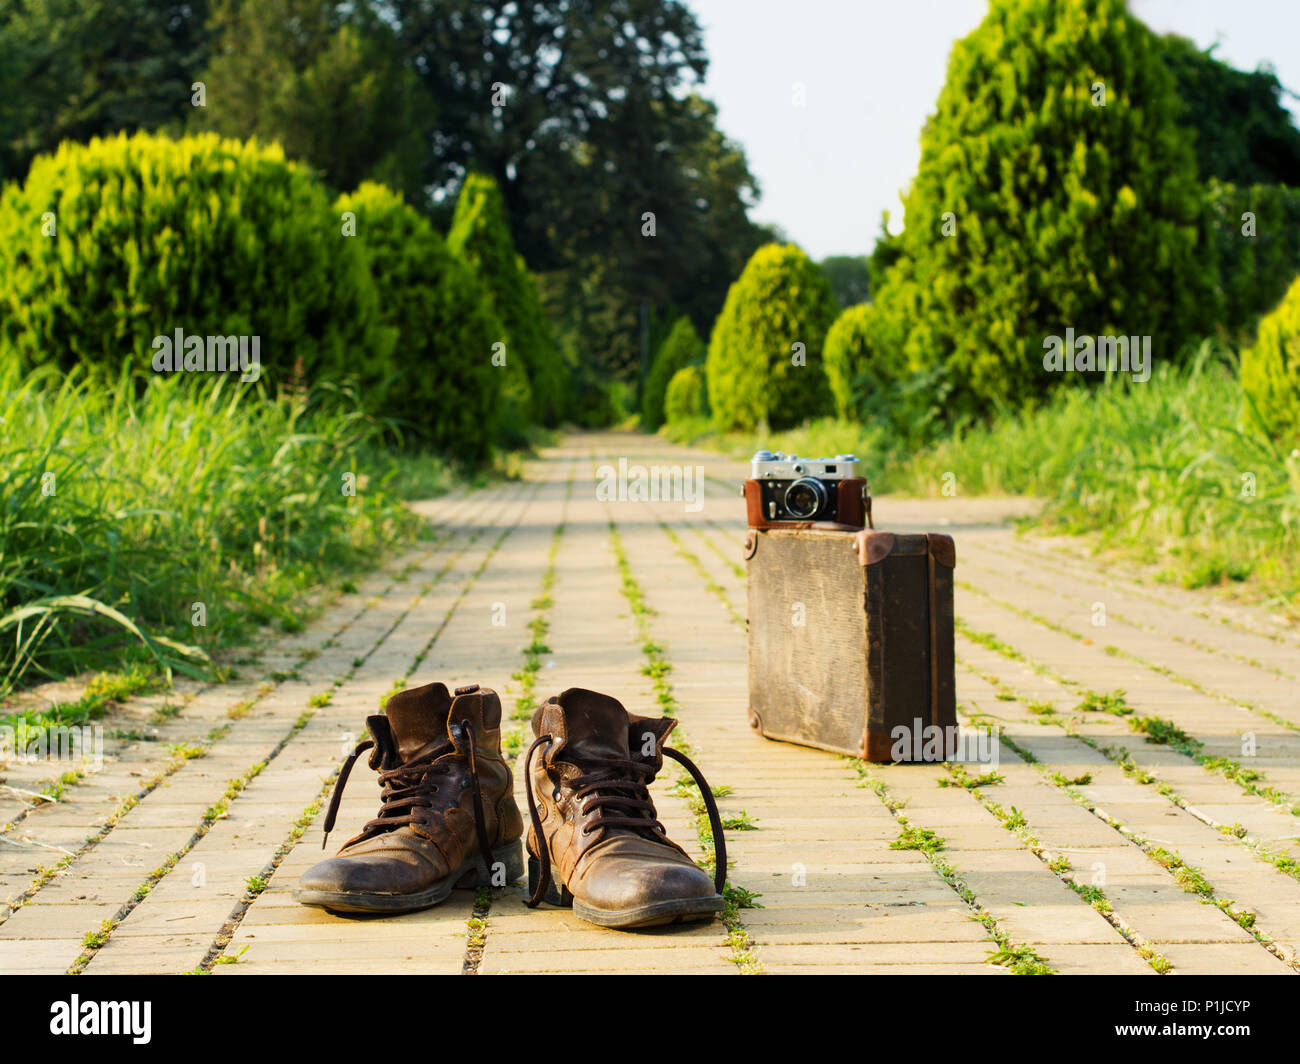 It’s time to wander the world and collect memories. Shabby boots in a foreground. An analog camera on a vintage suitcase, in a blurry background. Stock Photo